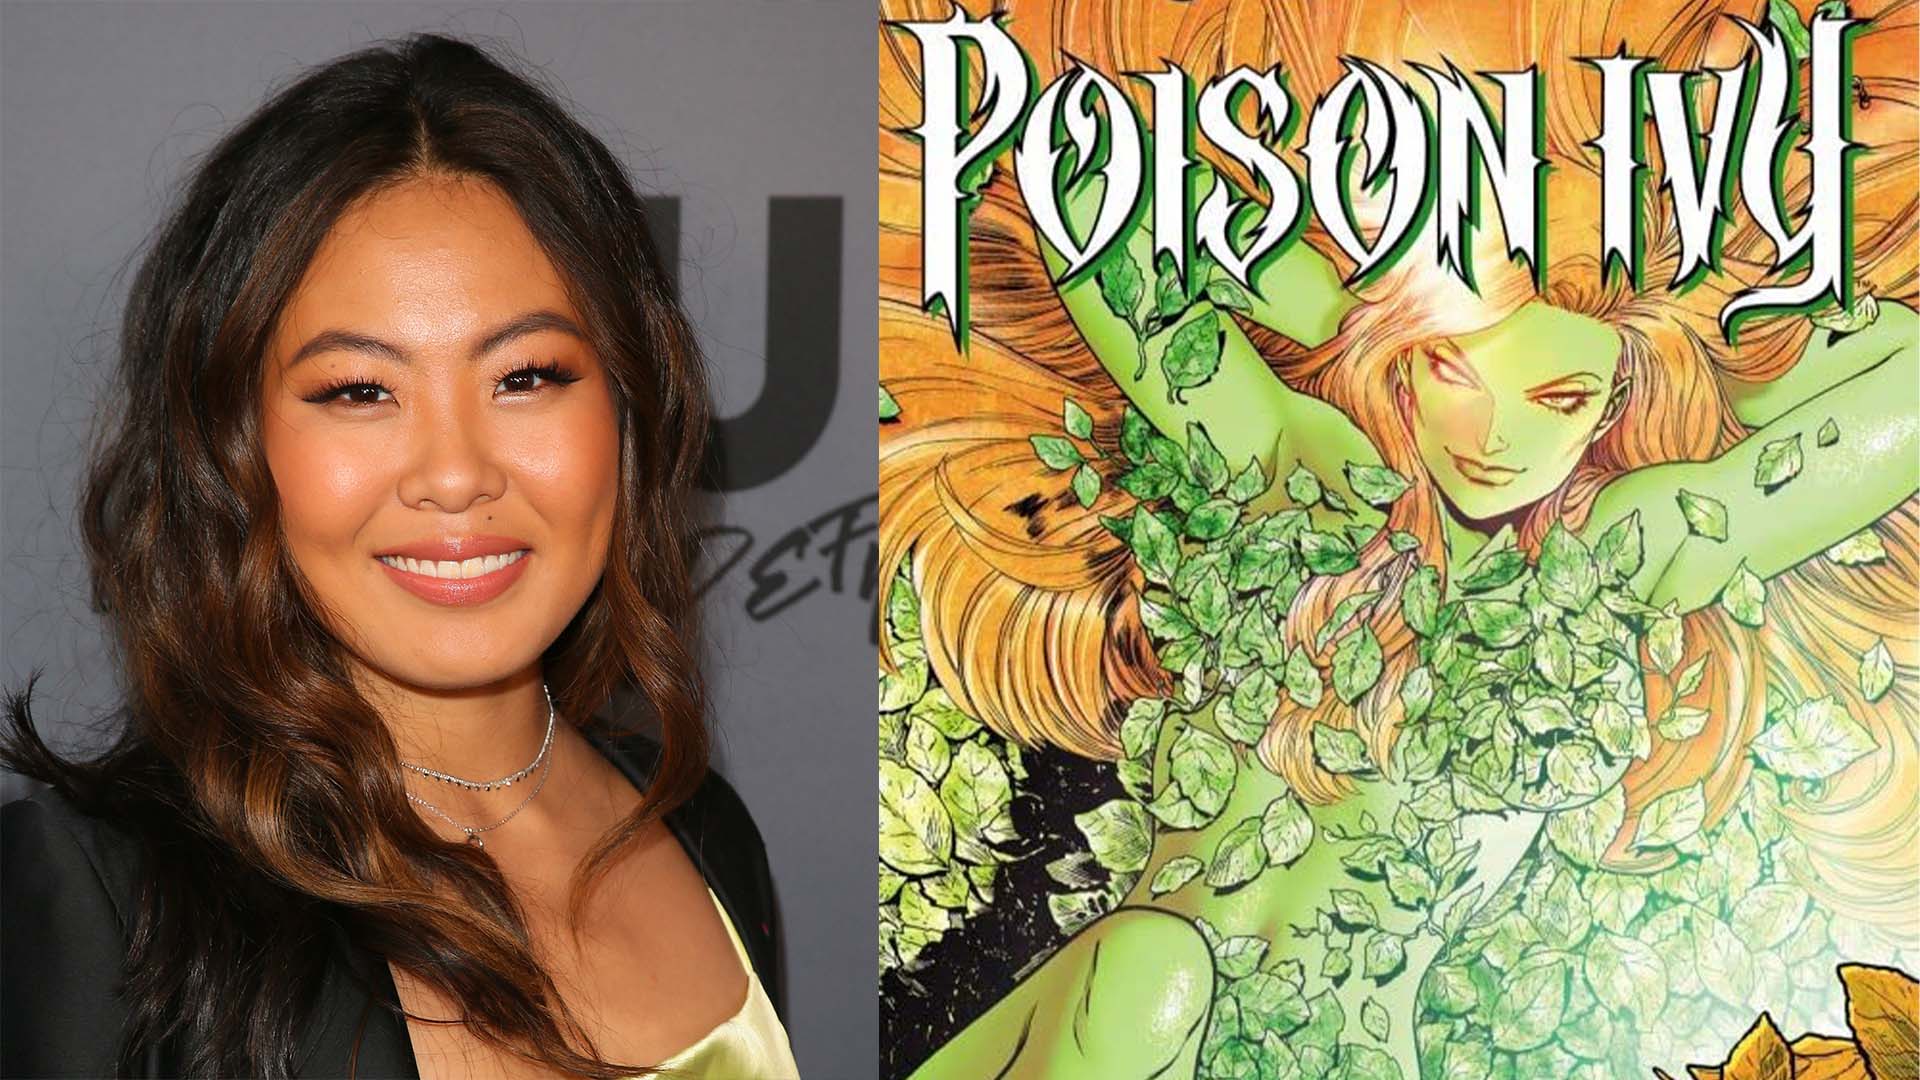 Nicole Kang Poison Ivy GETTY